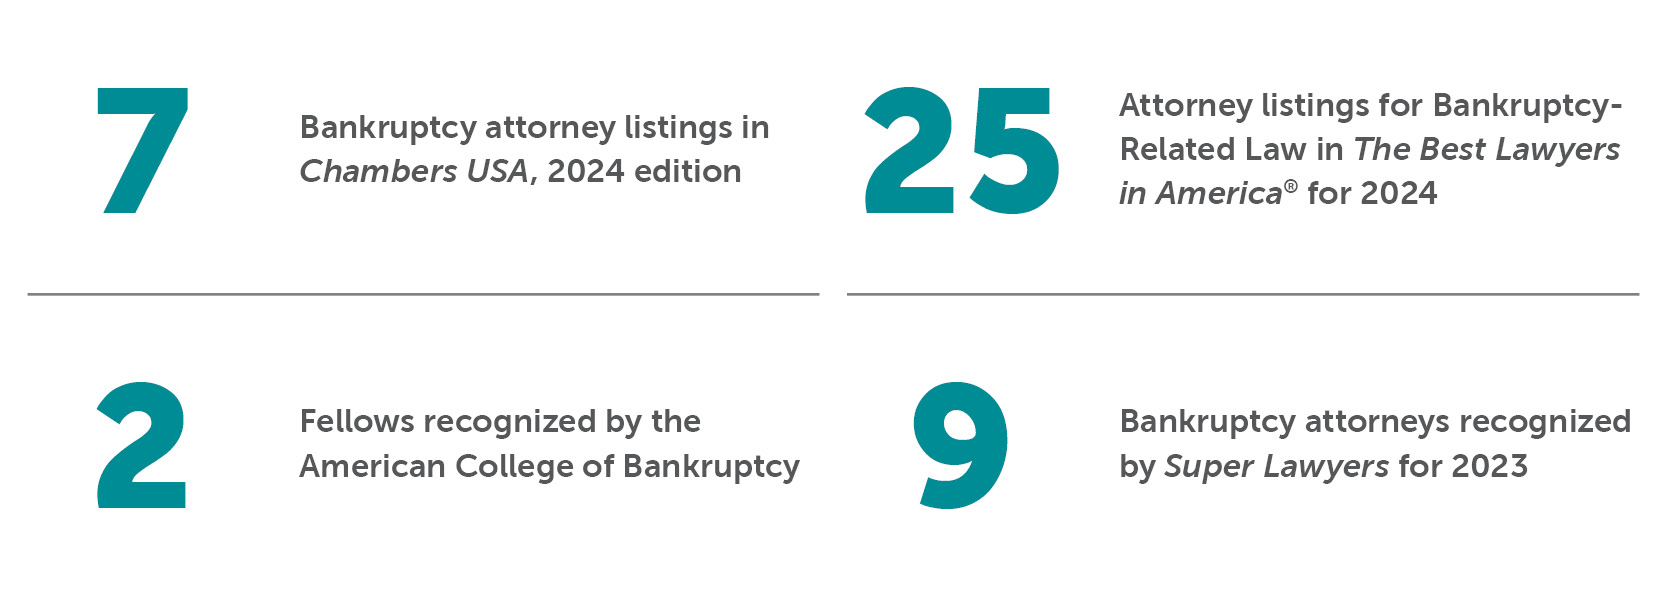 Bankruptcy & Creditors' Rights Bradley By the Numbers